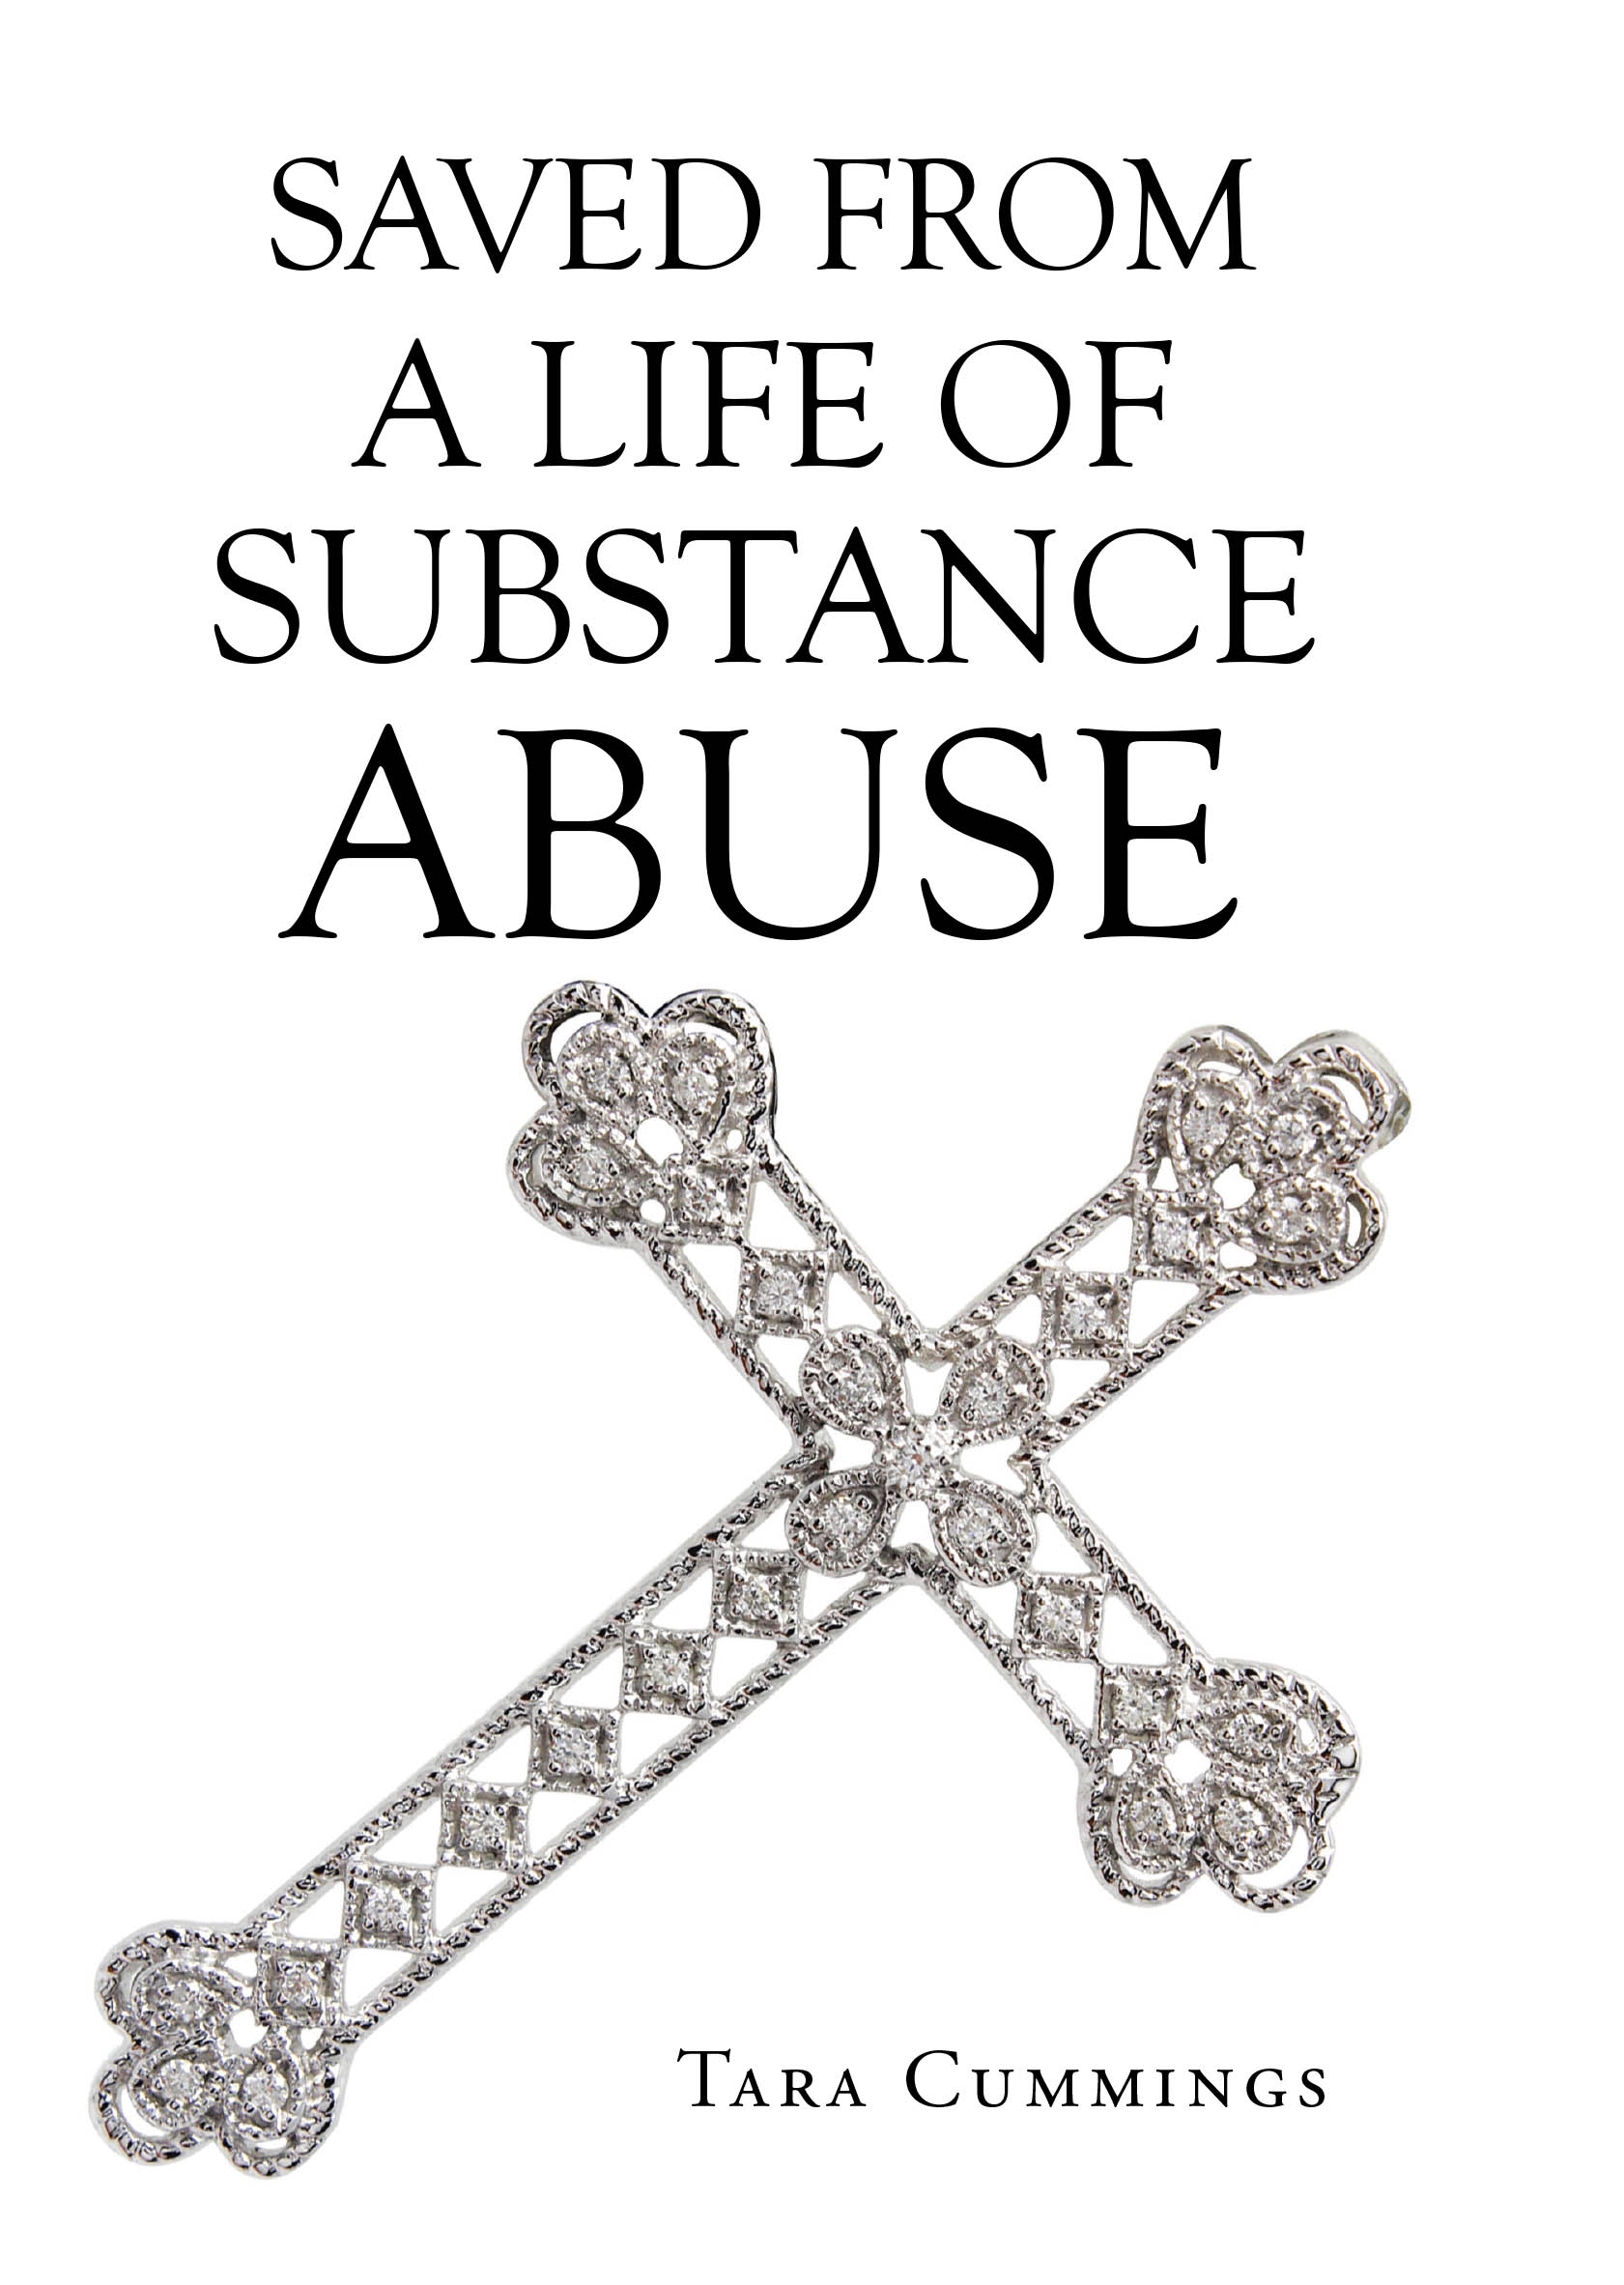 Tara Cummings’s Newly Released “Saved From A Life of Substance Abuse” is a Powerful Testimony of Redemption